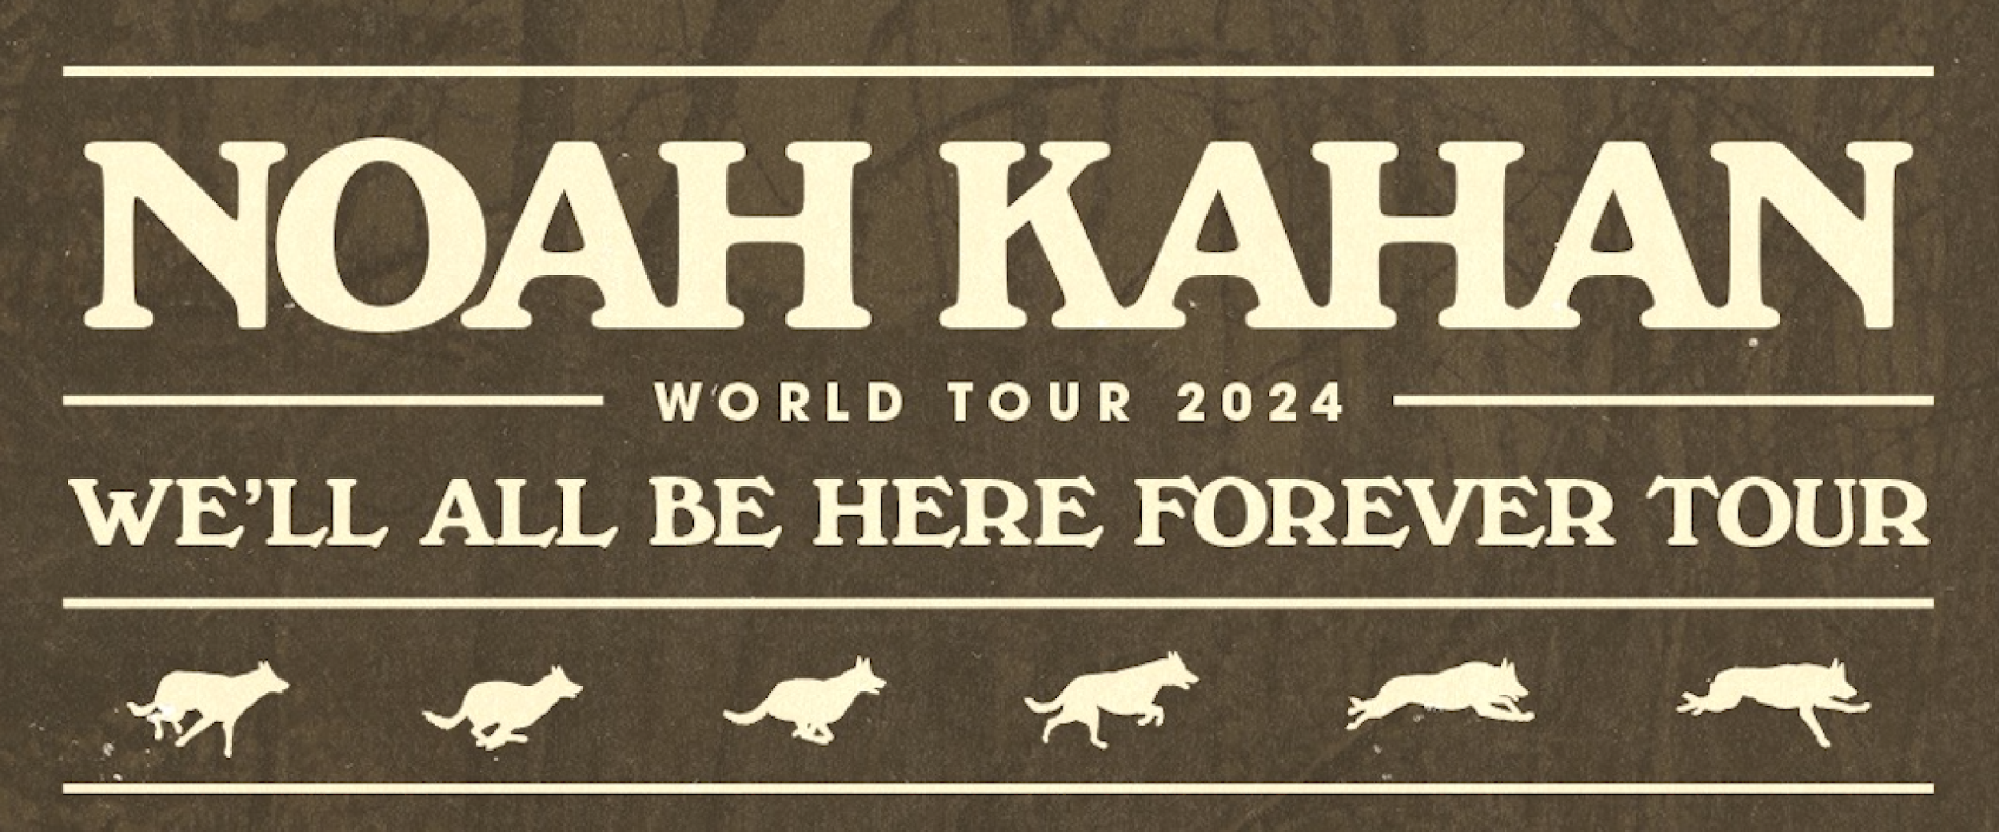 Noah Kahan tour 2024: How to get tickets to the 'We'll All Be Here